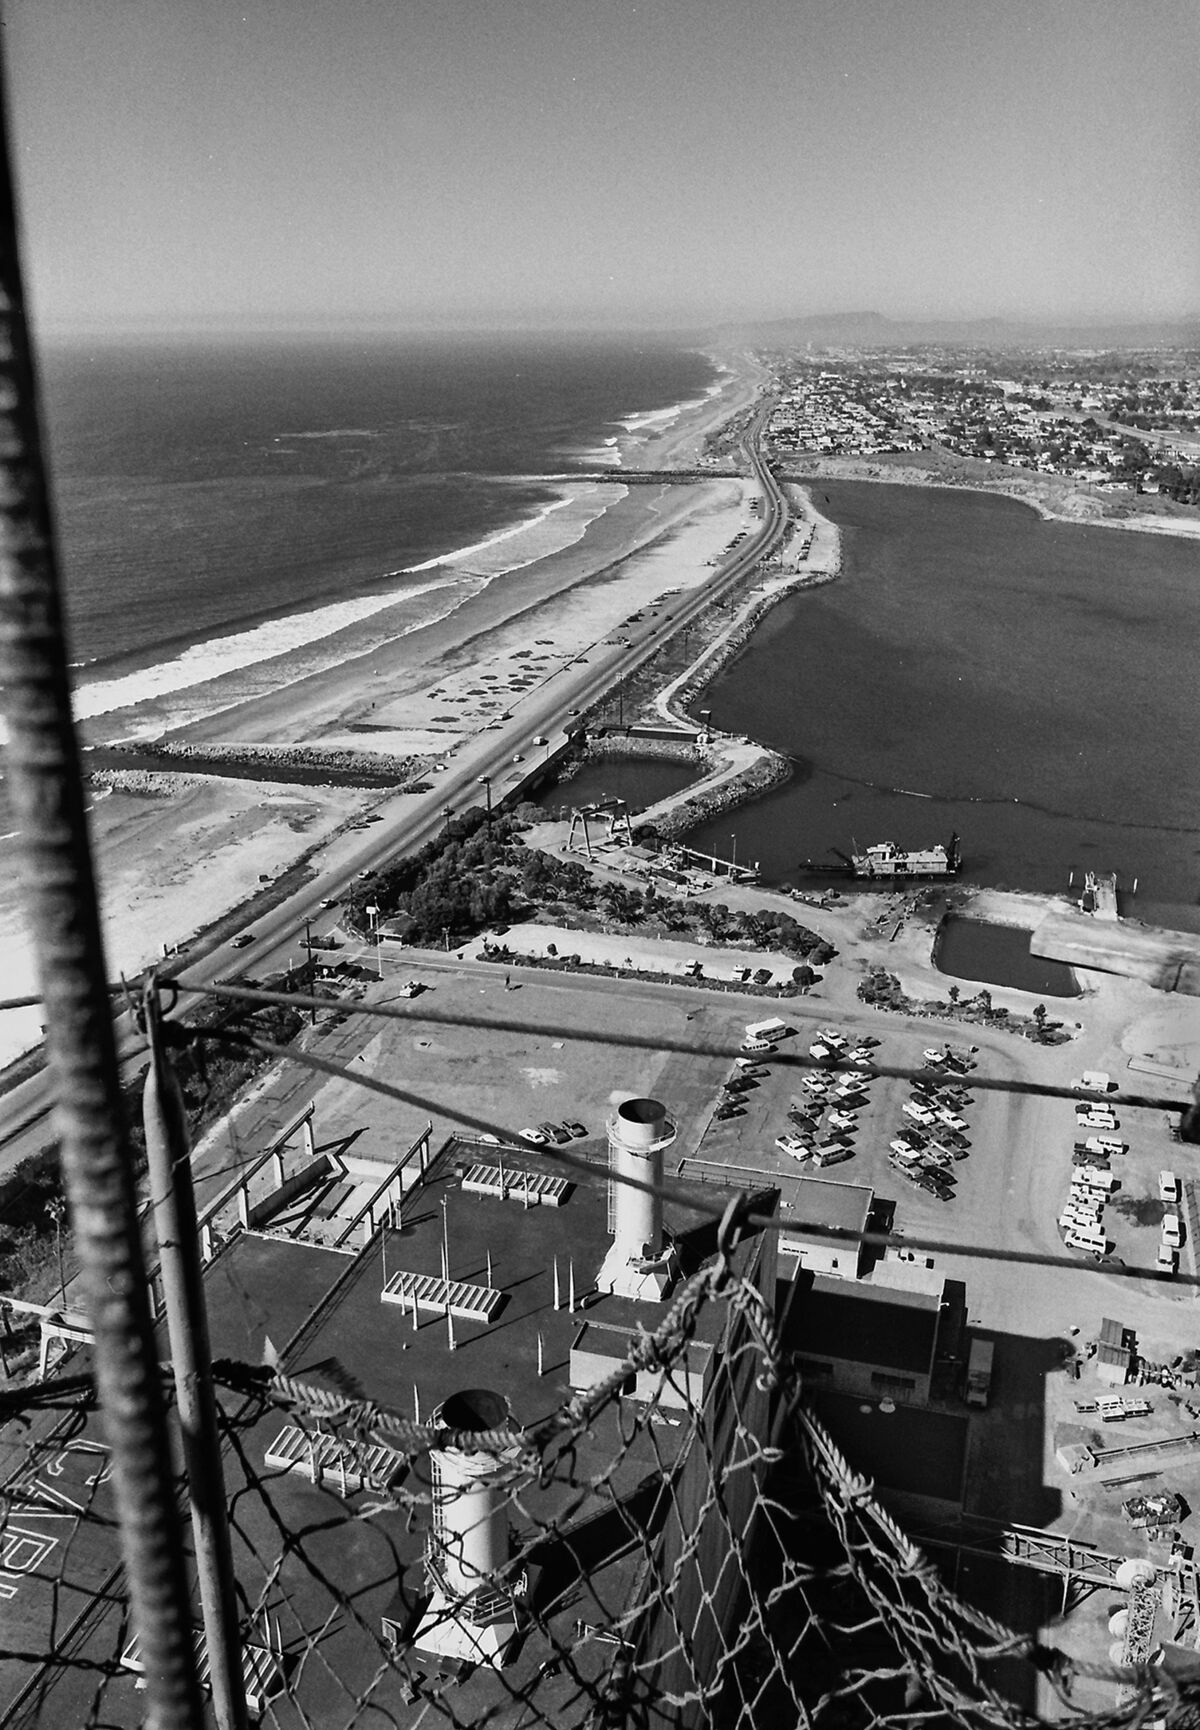 A view from the top of smokestack under construction in 1977. The photographer rode up the middle in a construction elevator.